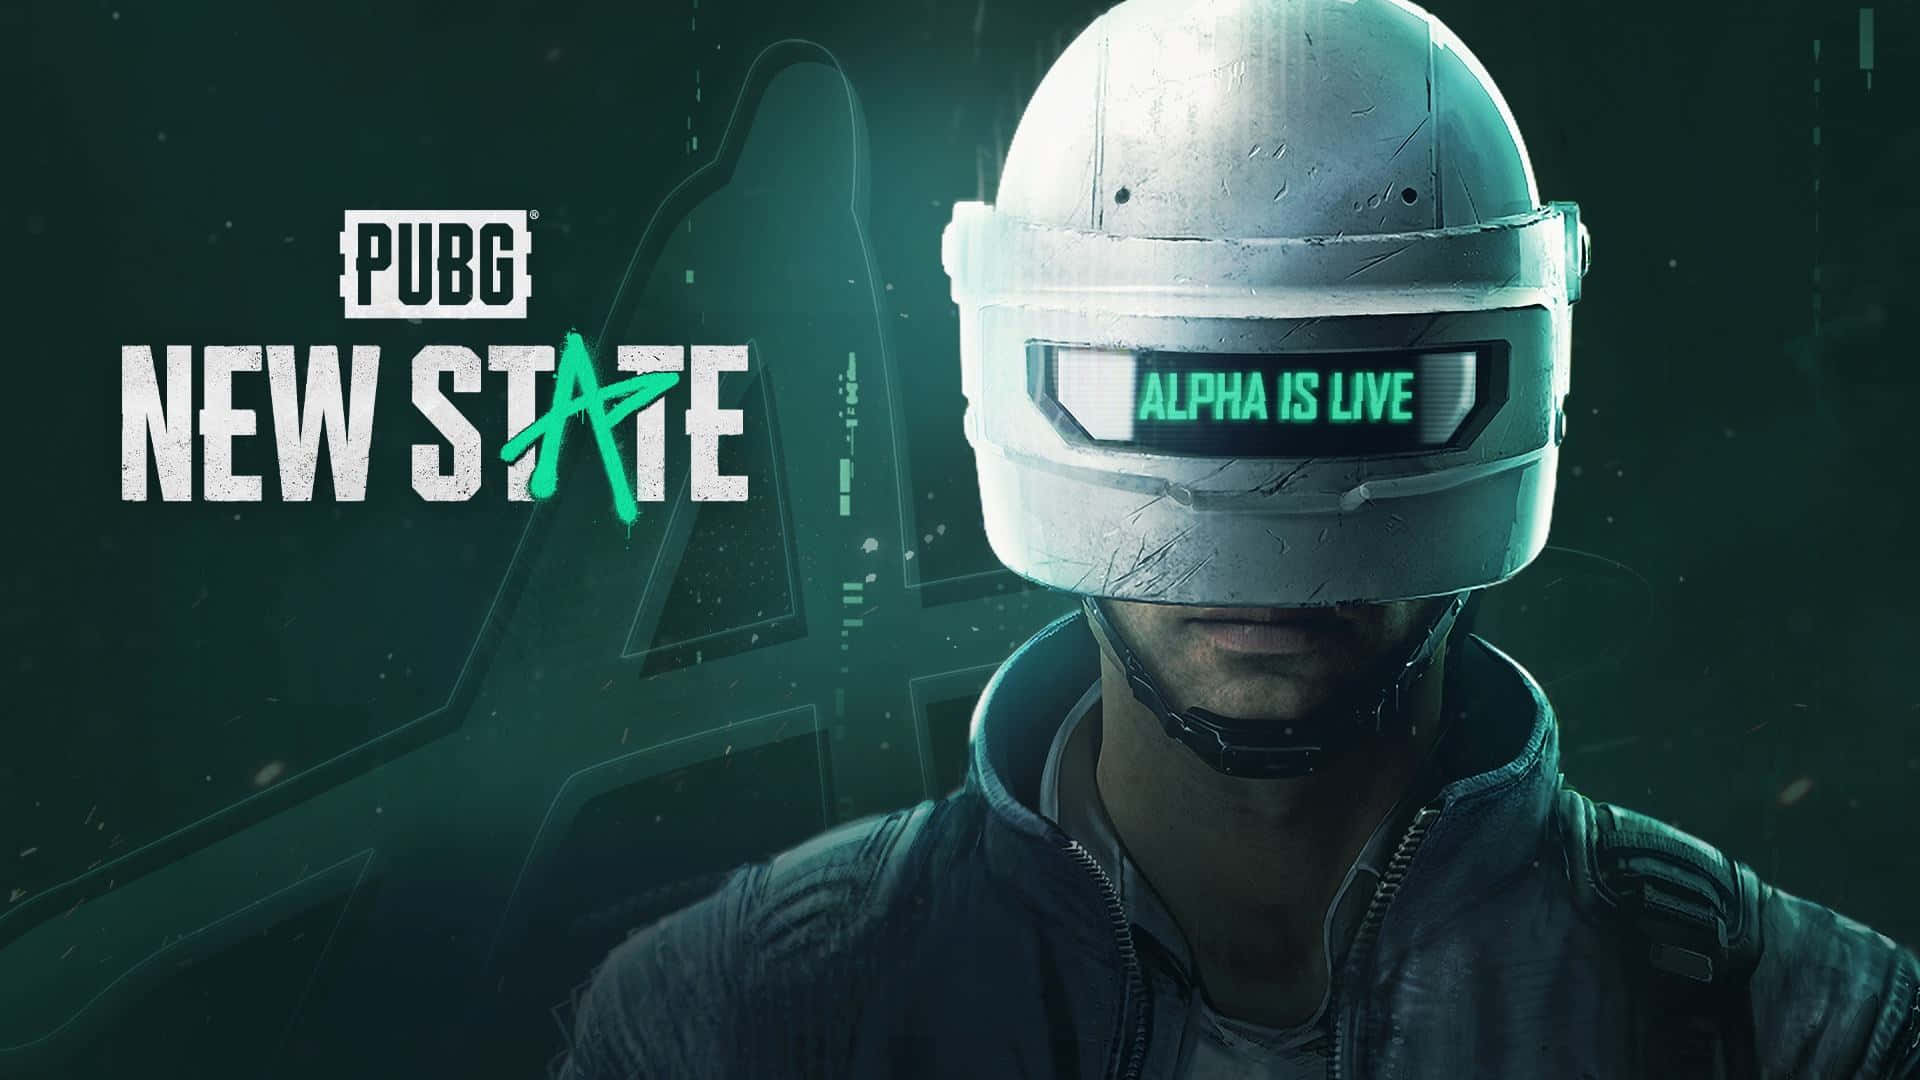 Pubg New State Alpha Is Alive